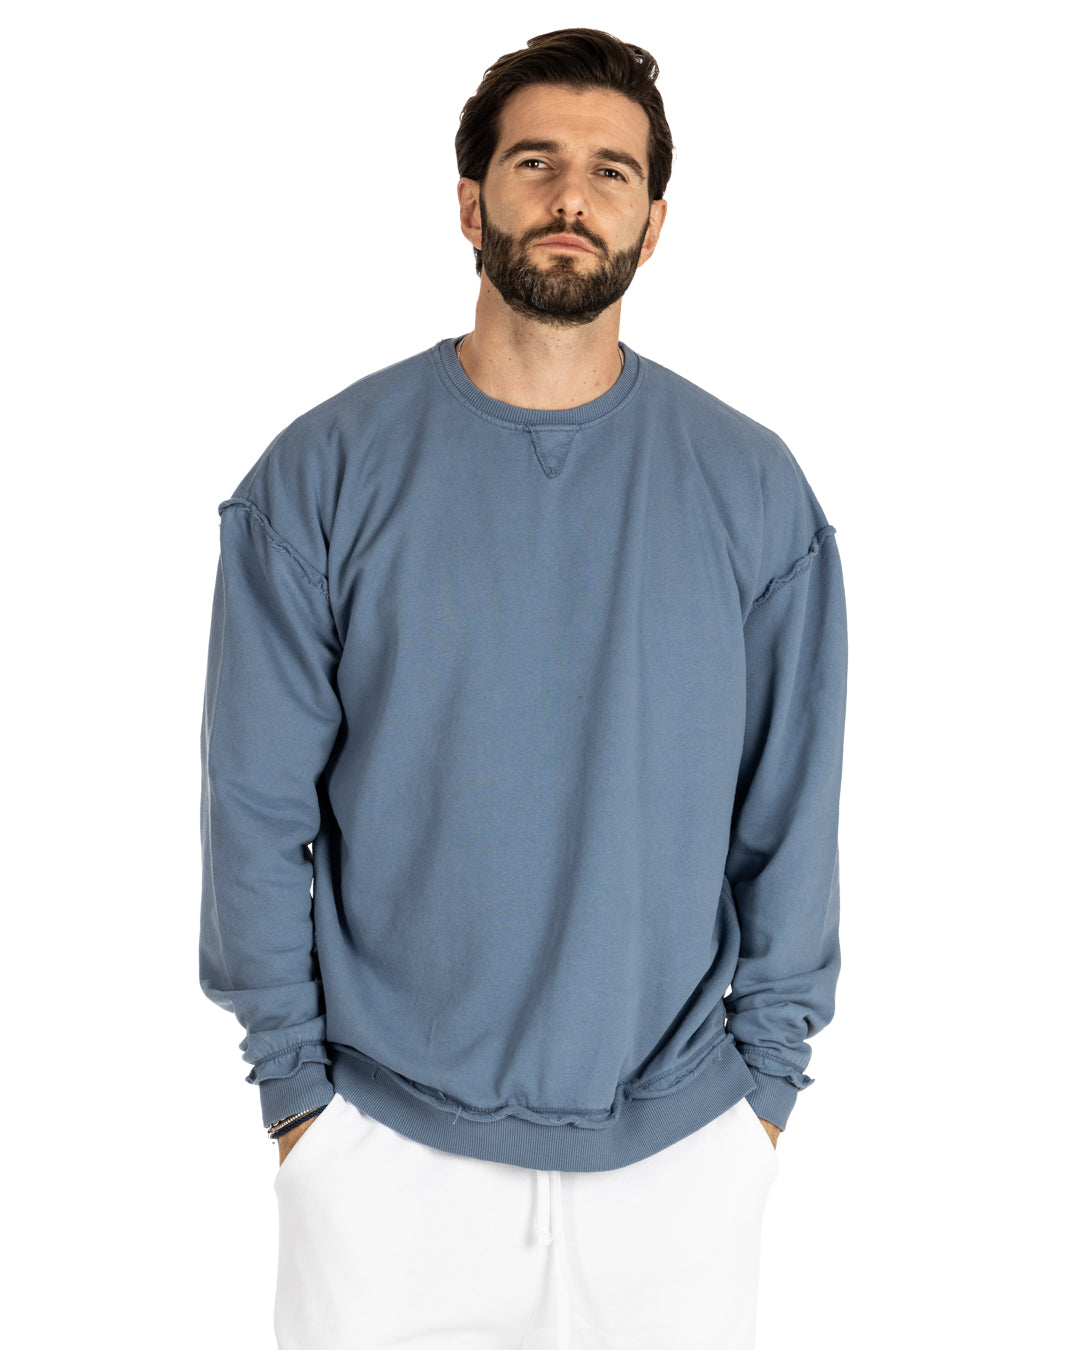 KYOTO - OVERSIZED SWEATSHIRT WITH VISIBLE LIGHT BLUE SEAMS